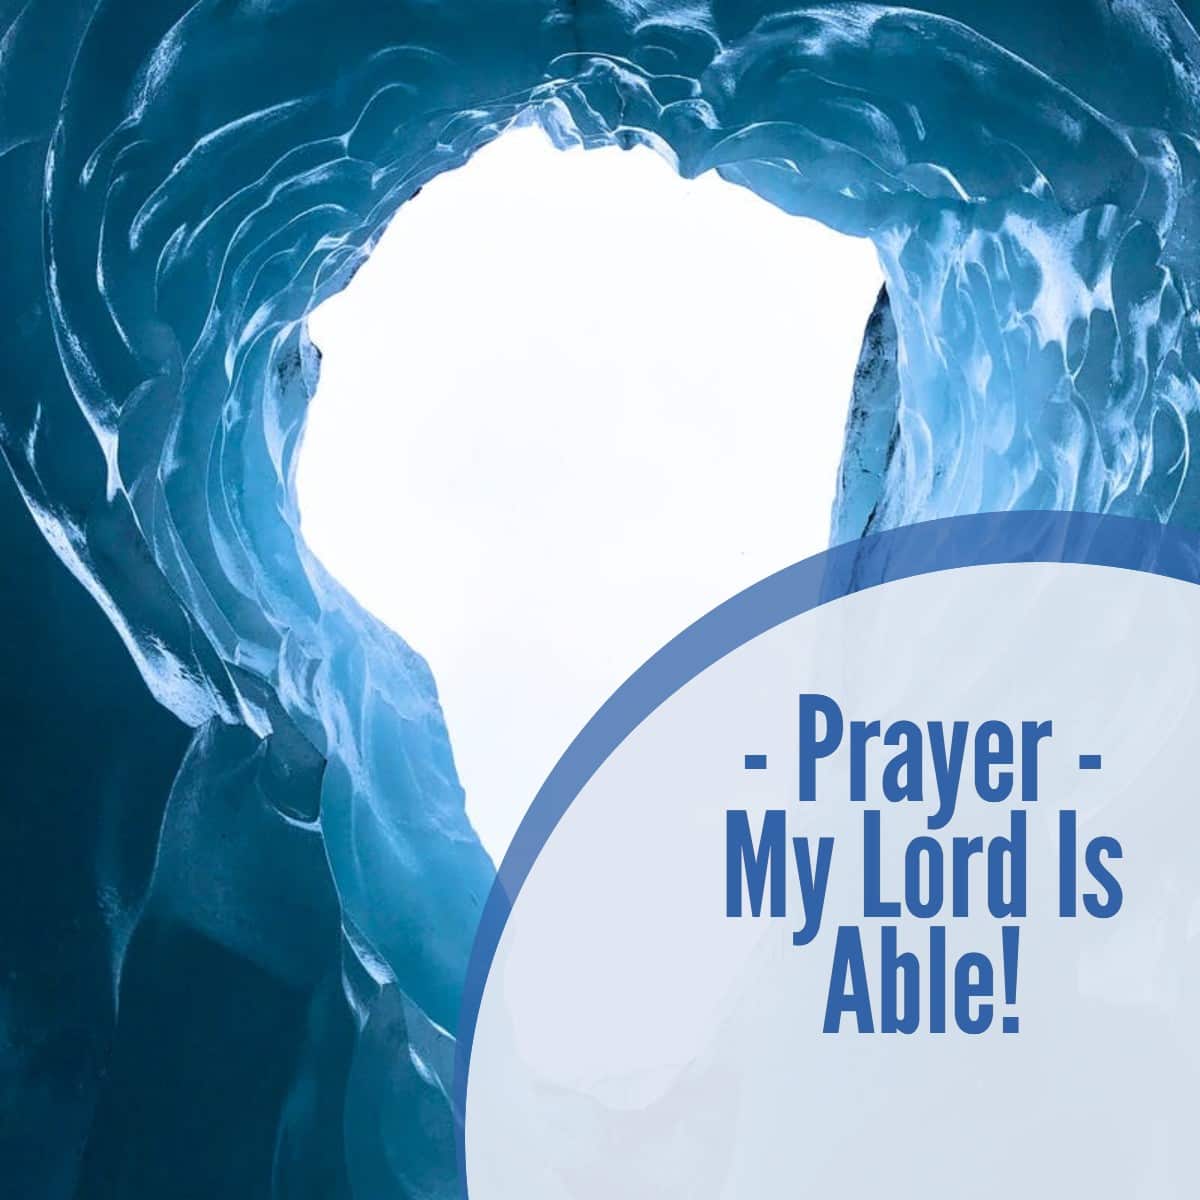 Prayer – My Lord is Able!